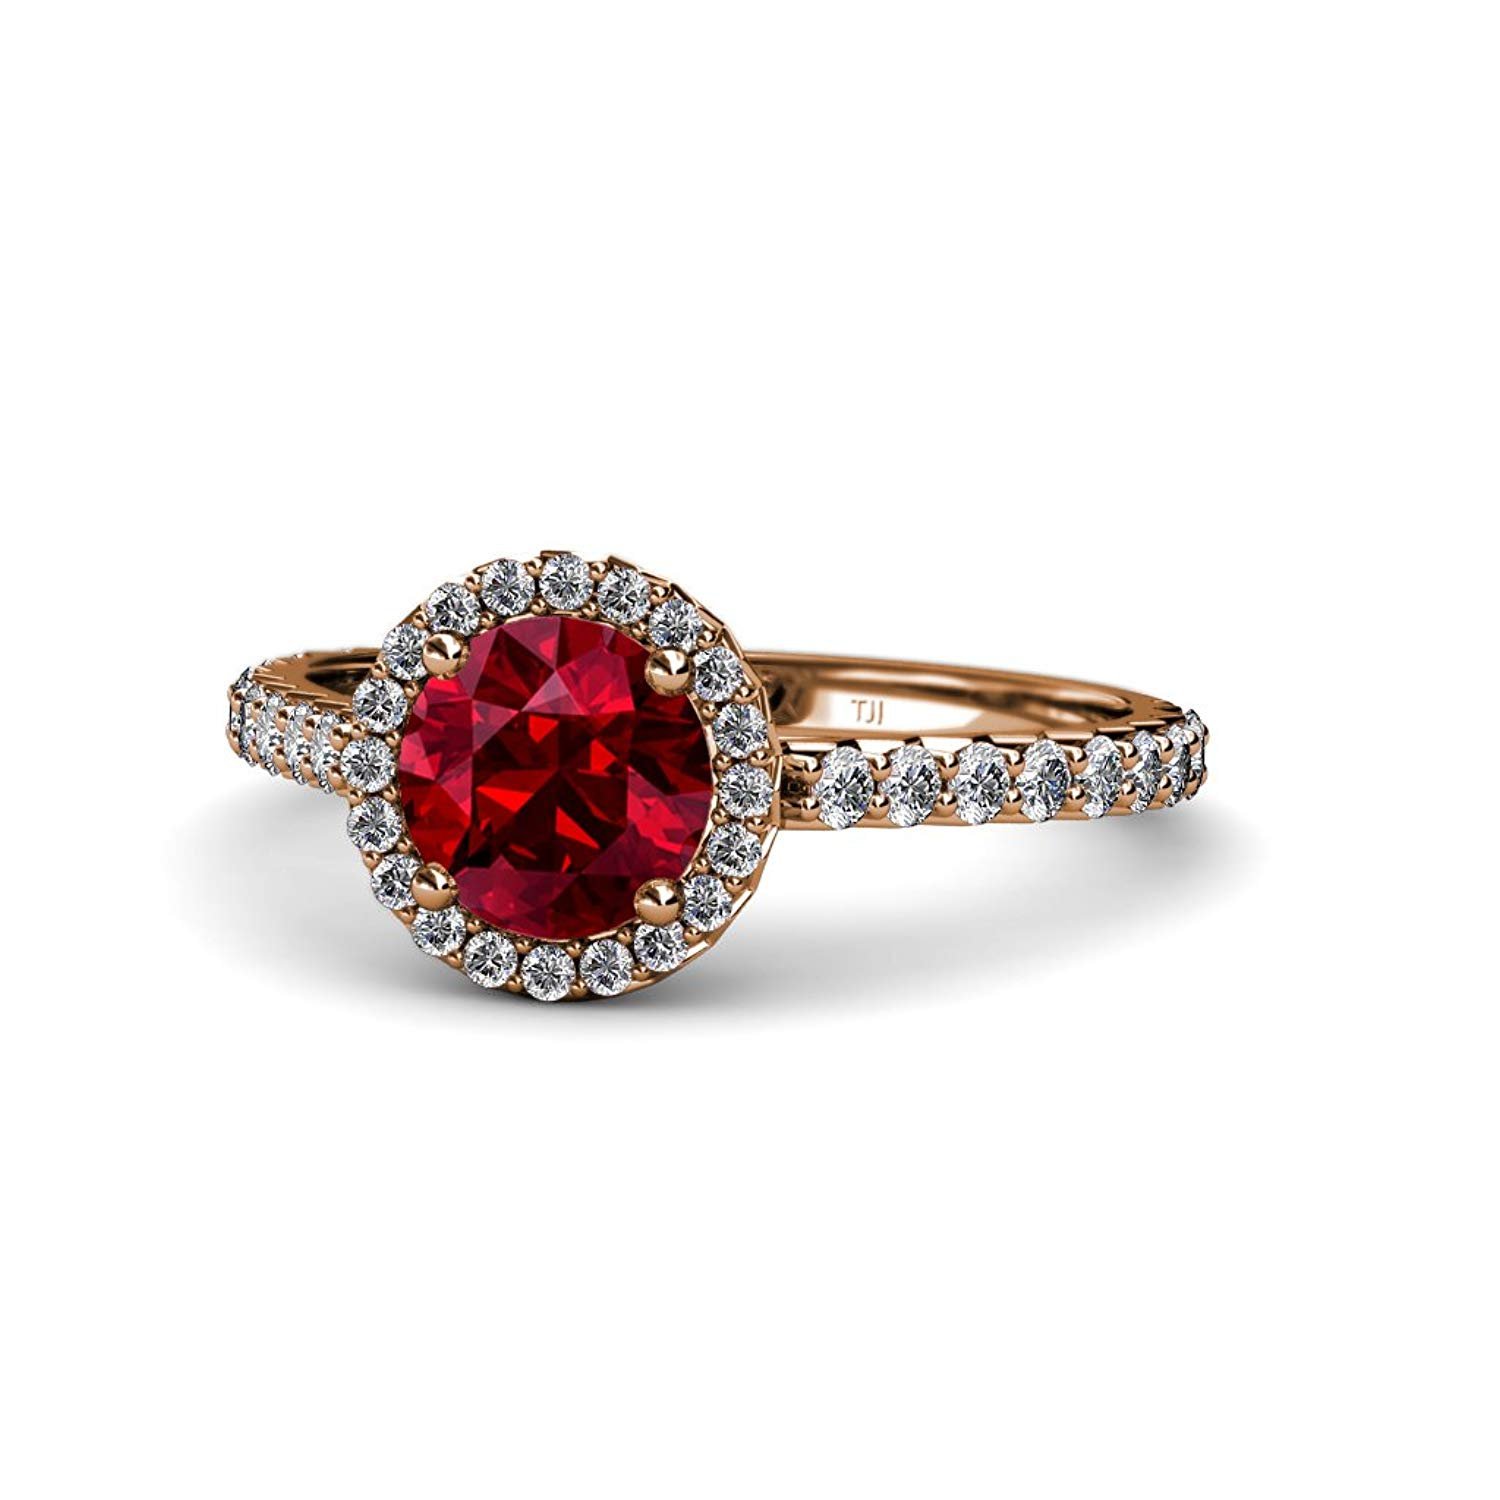 Ruby and Diamond (SI2-I1, G-H) Halo Engagement Ring 1.33 ct tw in 14K Rose Gold.size 8.5 - image 1 of 8